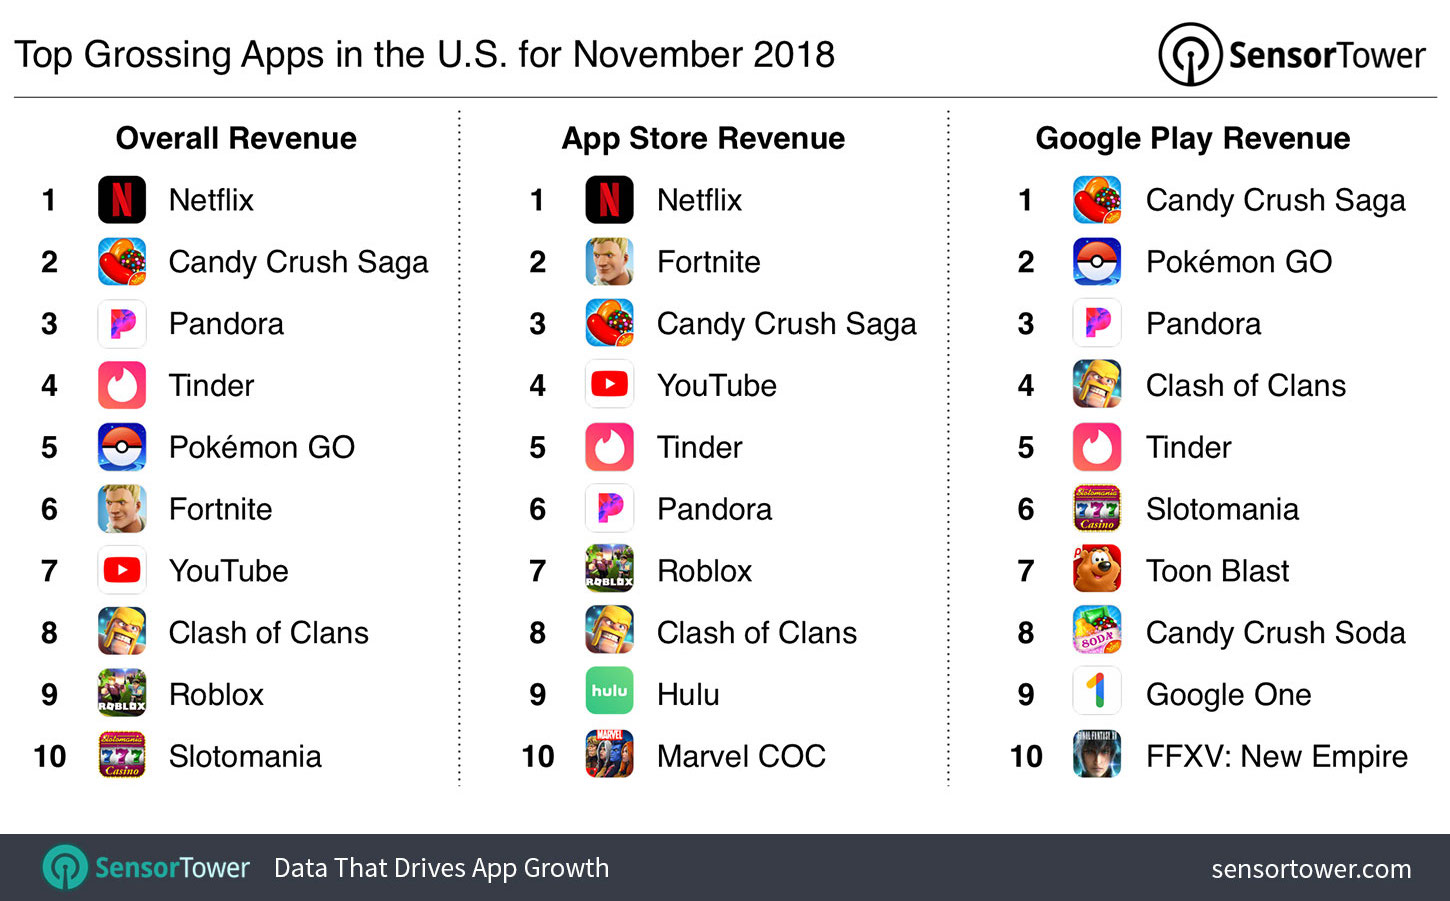 Top Grossing Apps in the U.S. for November 2018